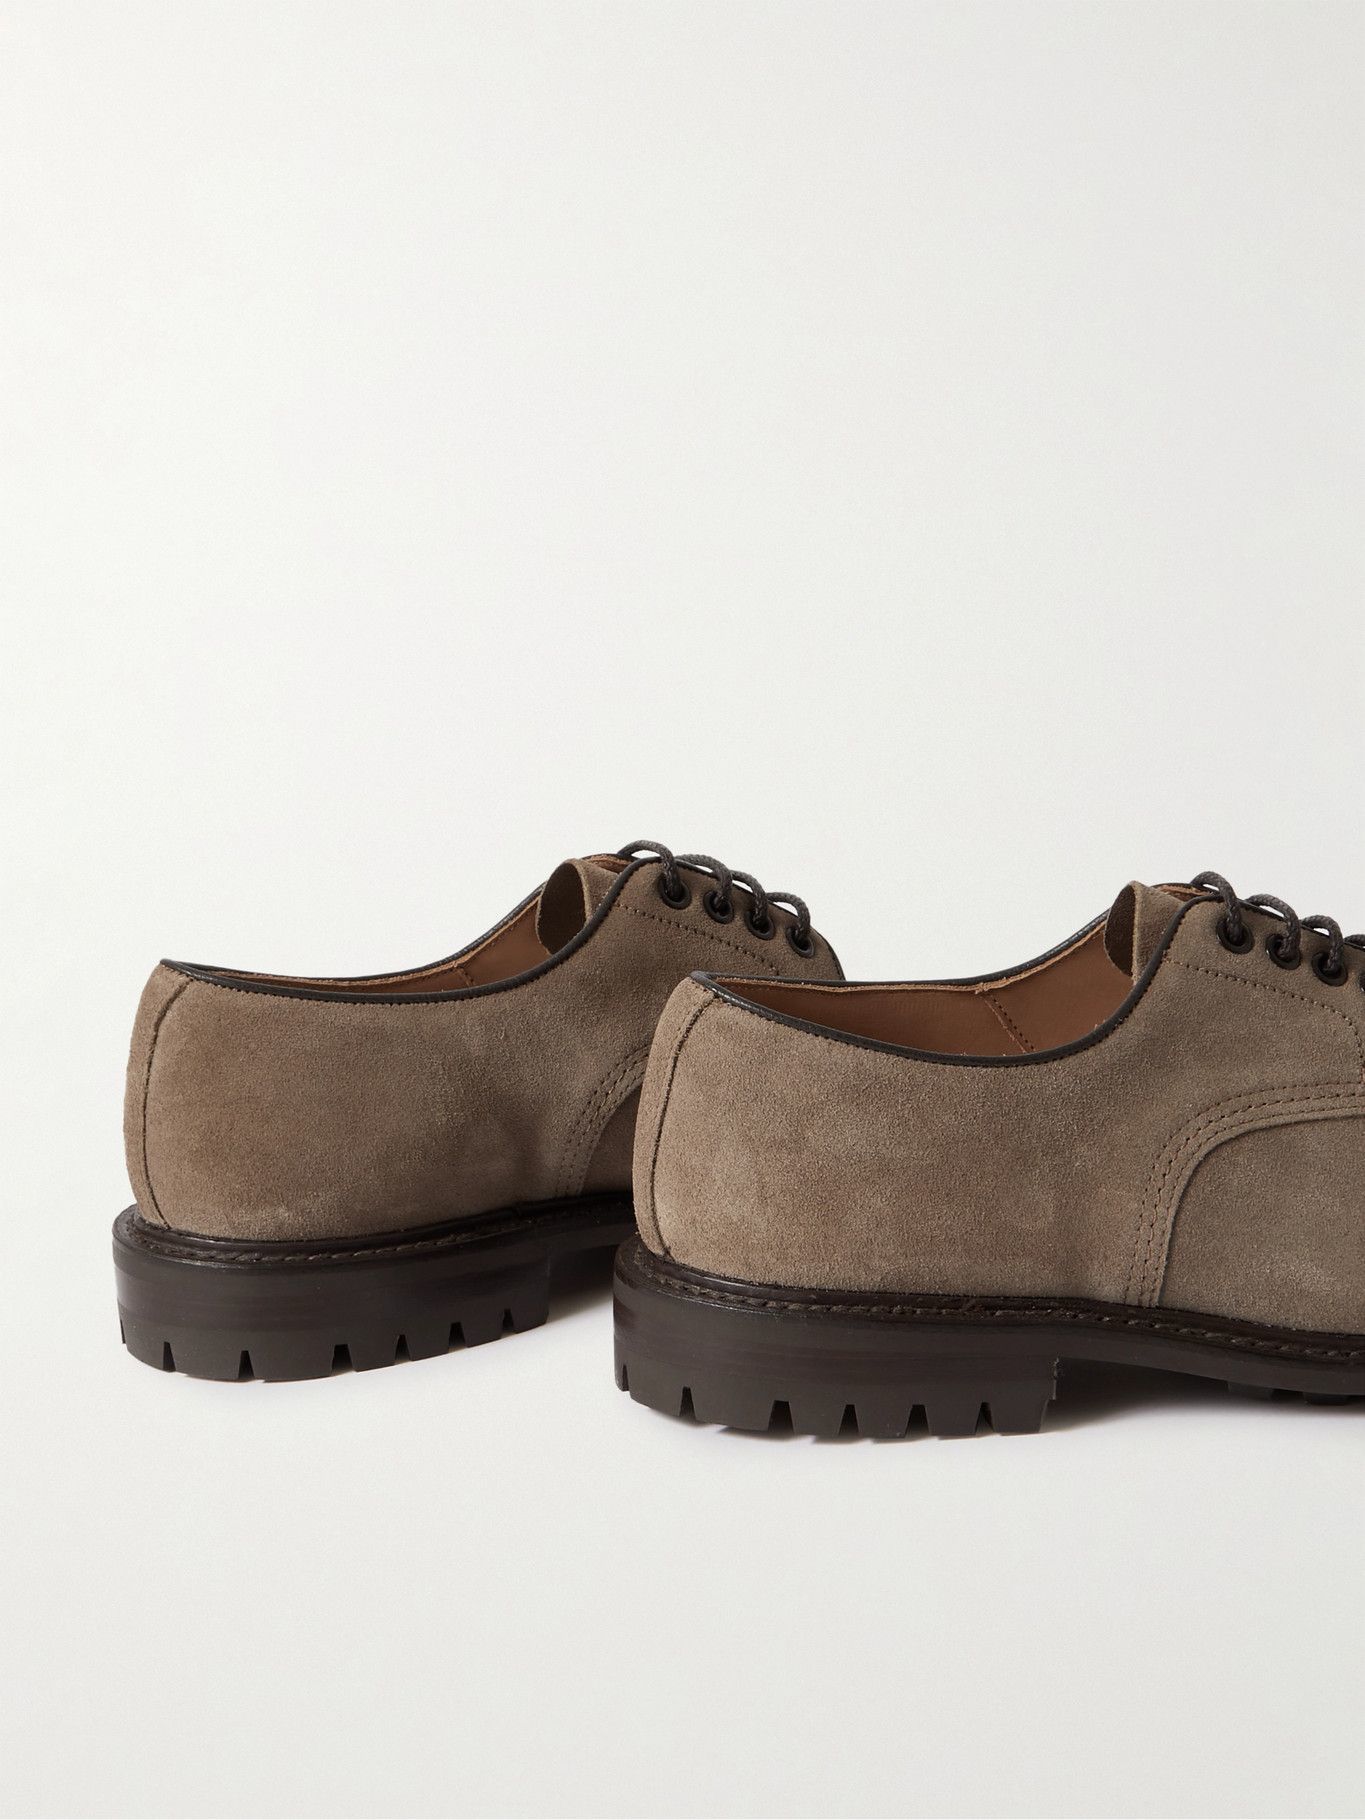 Tricker's - Daniel Leather-Trimmed Suede Derby Shoes - Brown Tricker's